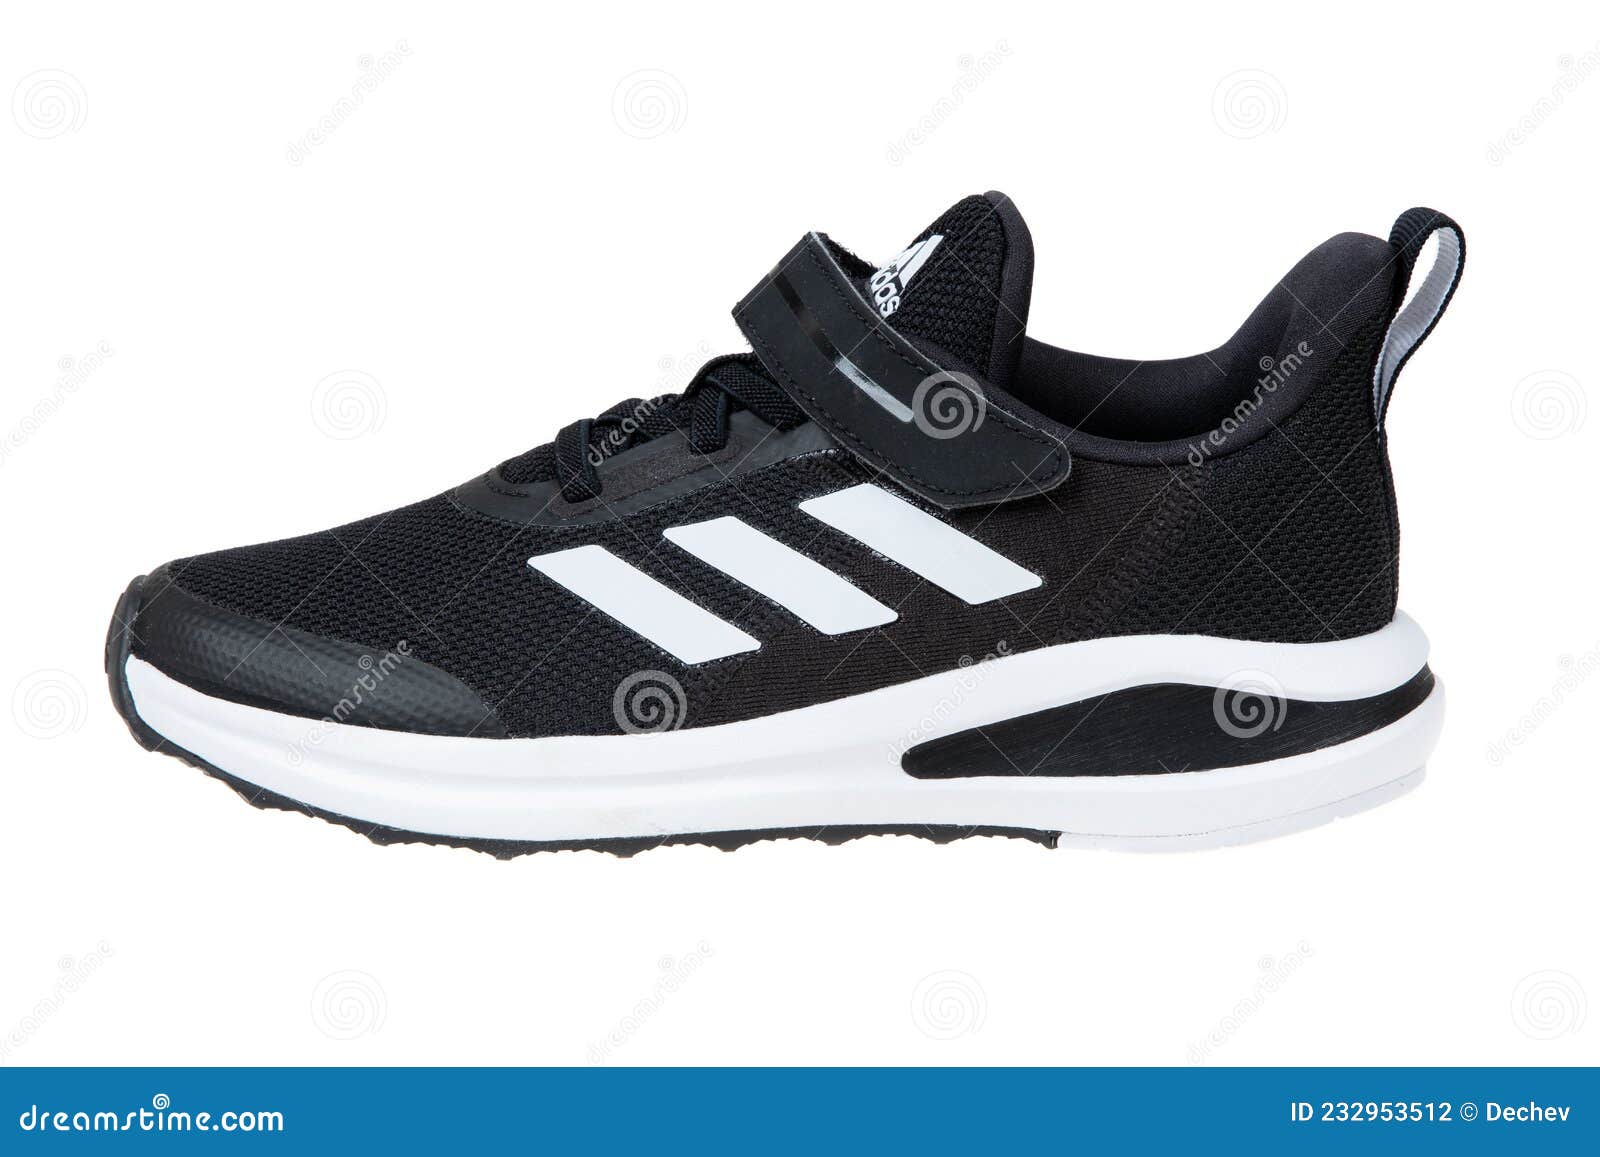 Varna , Bulgaria - MARCH 2, 2021 : ADIDAS FORTA RUN Sport Shoe, Isolated.  Product Shot Editorial Photography - Image of clothes, object: 232953512